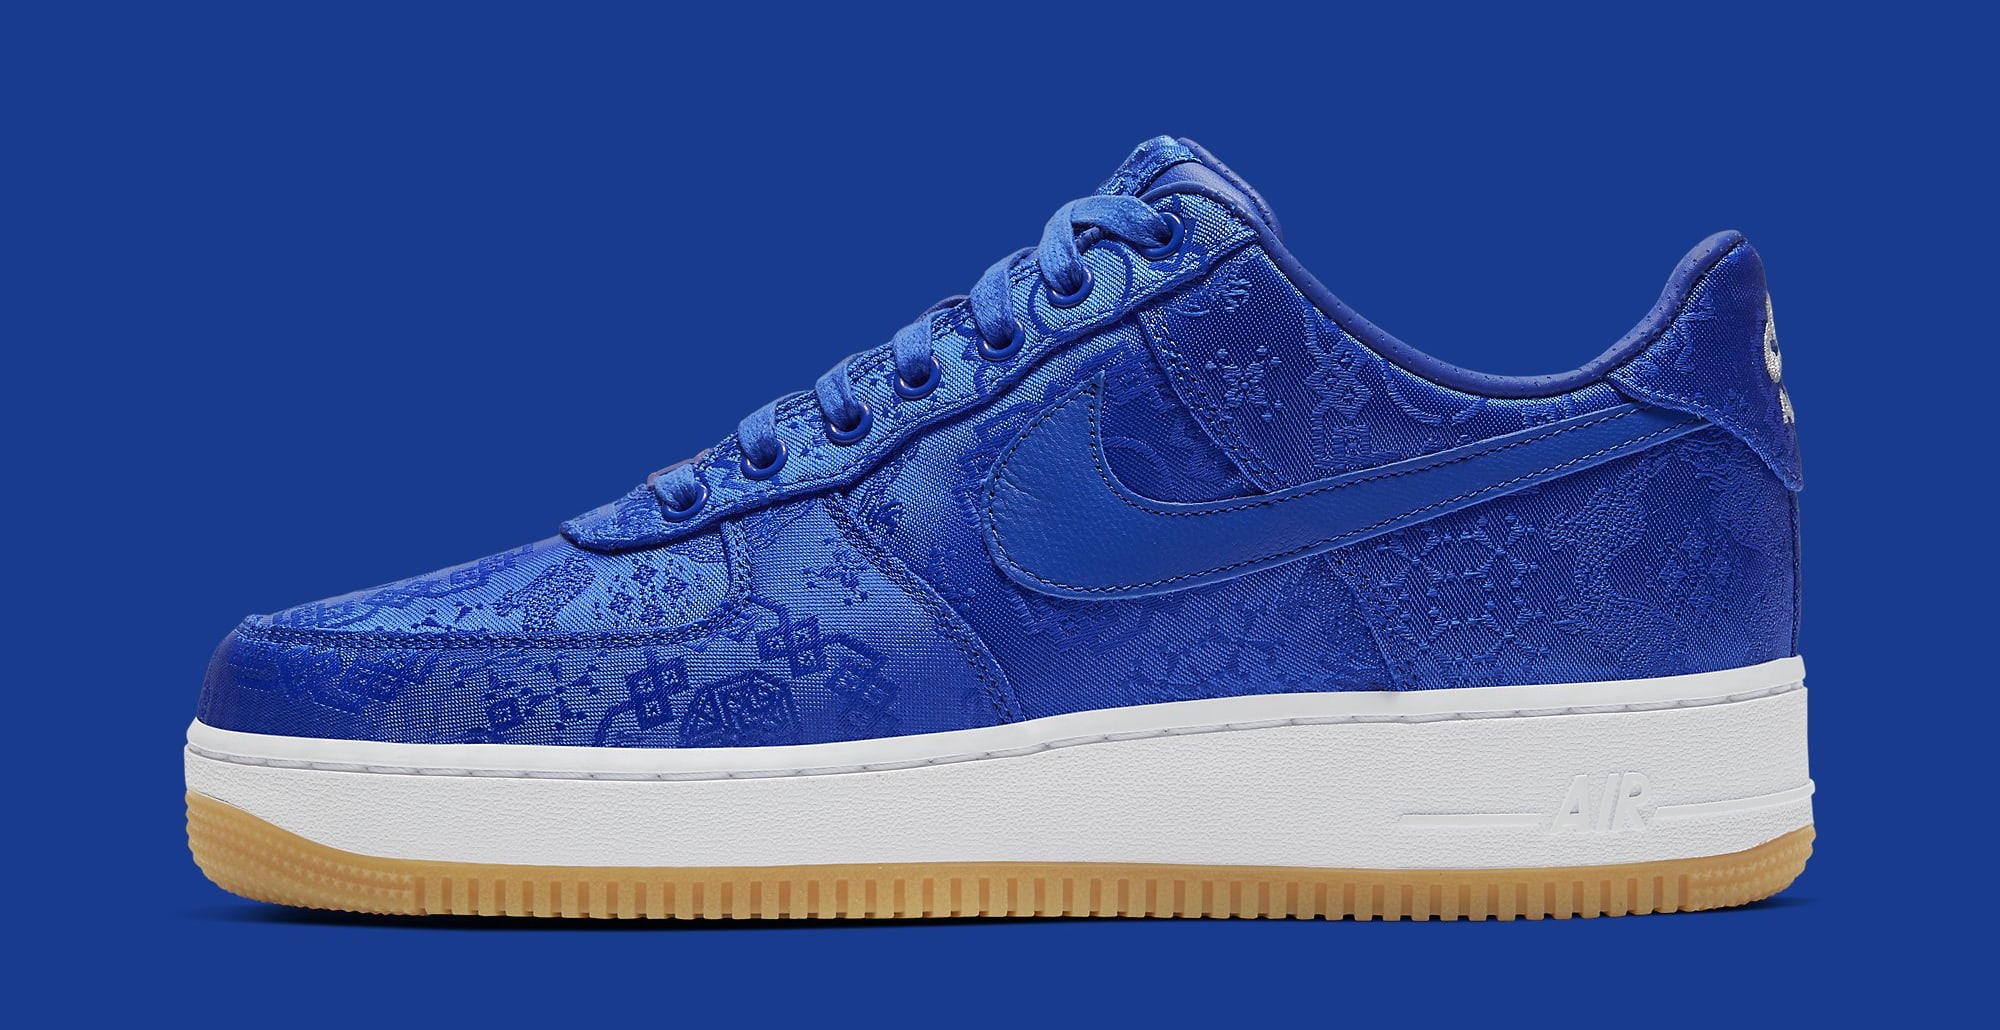 Best Look Yet at Clot's New Air Force 1 Collab | Complex